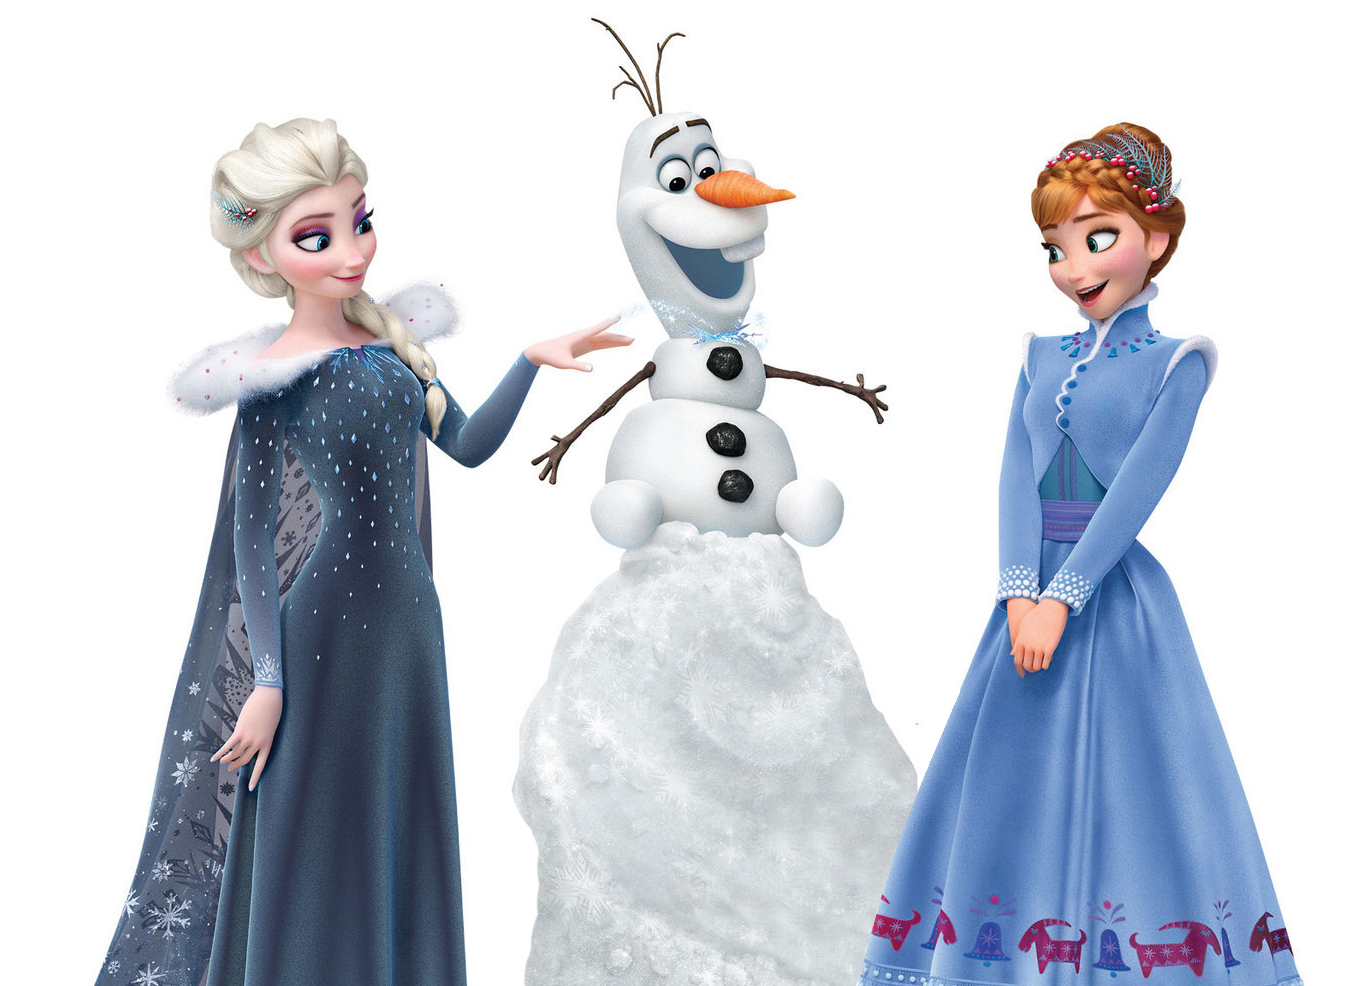 of Olaf’s Frozen Adventure main characters, Olaf’s Frozen Adventure, Olaf.....